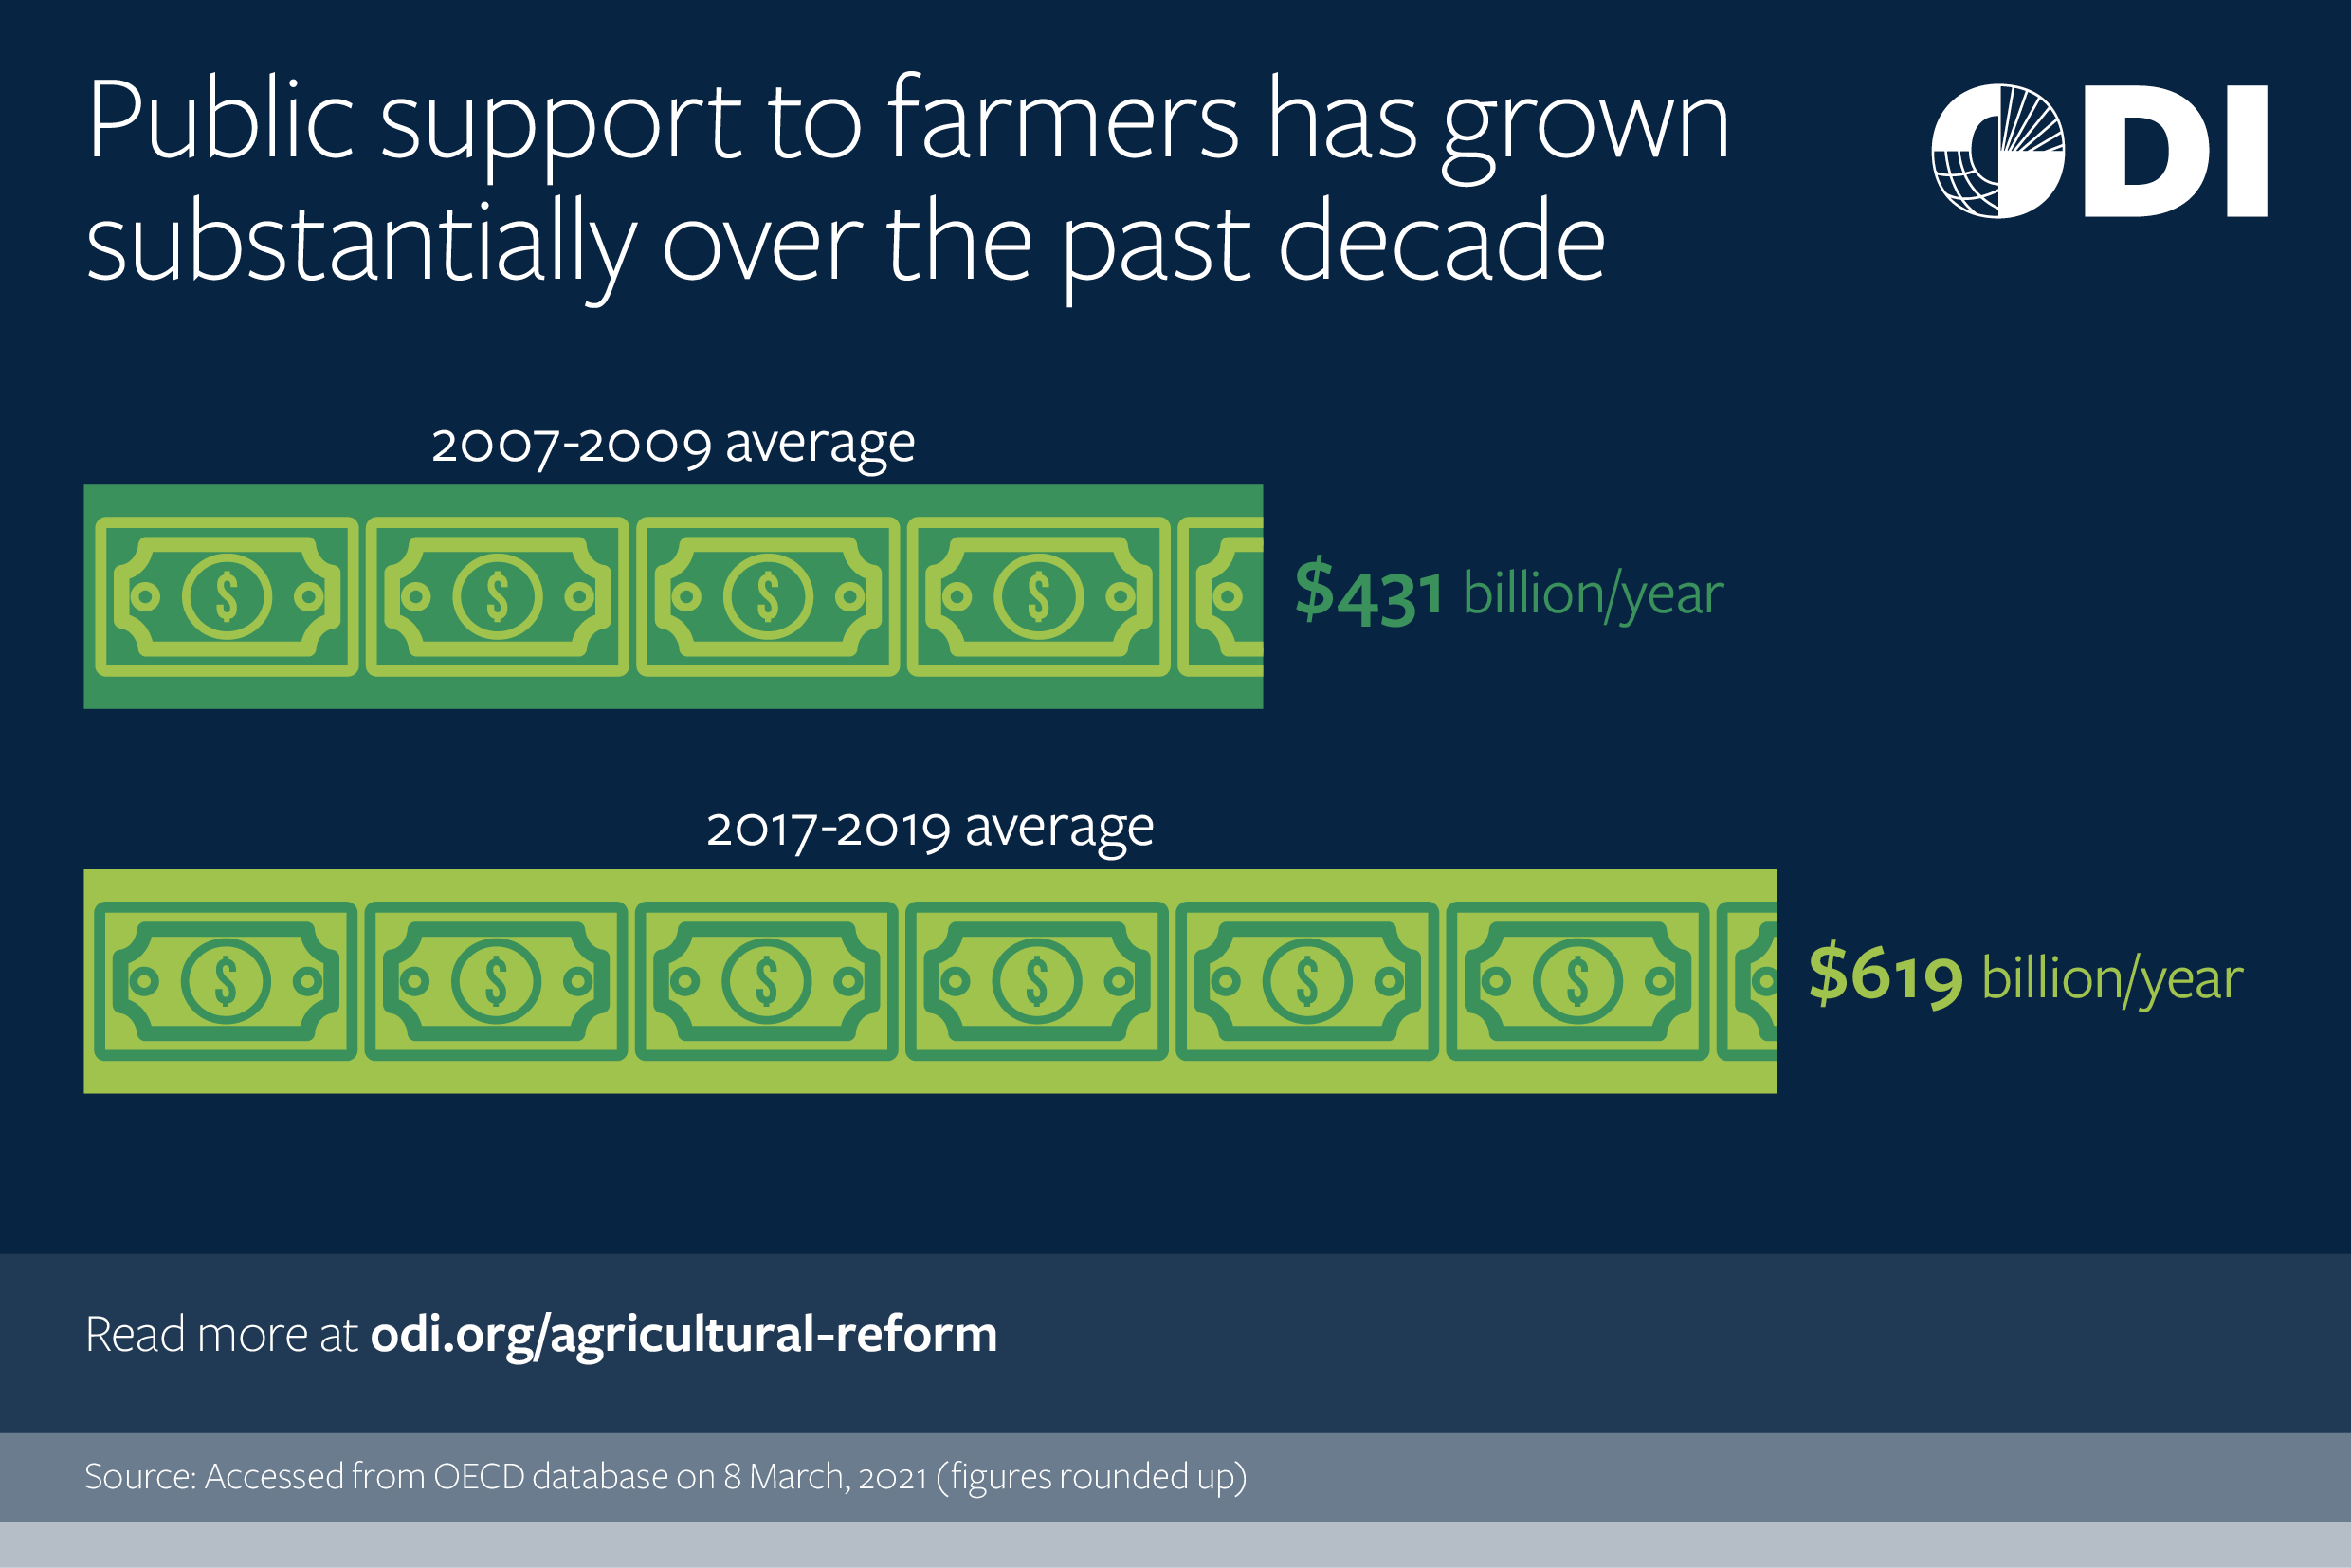 Public support to farmers has grown substantially over the past decade.